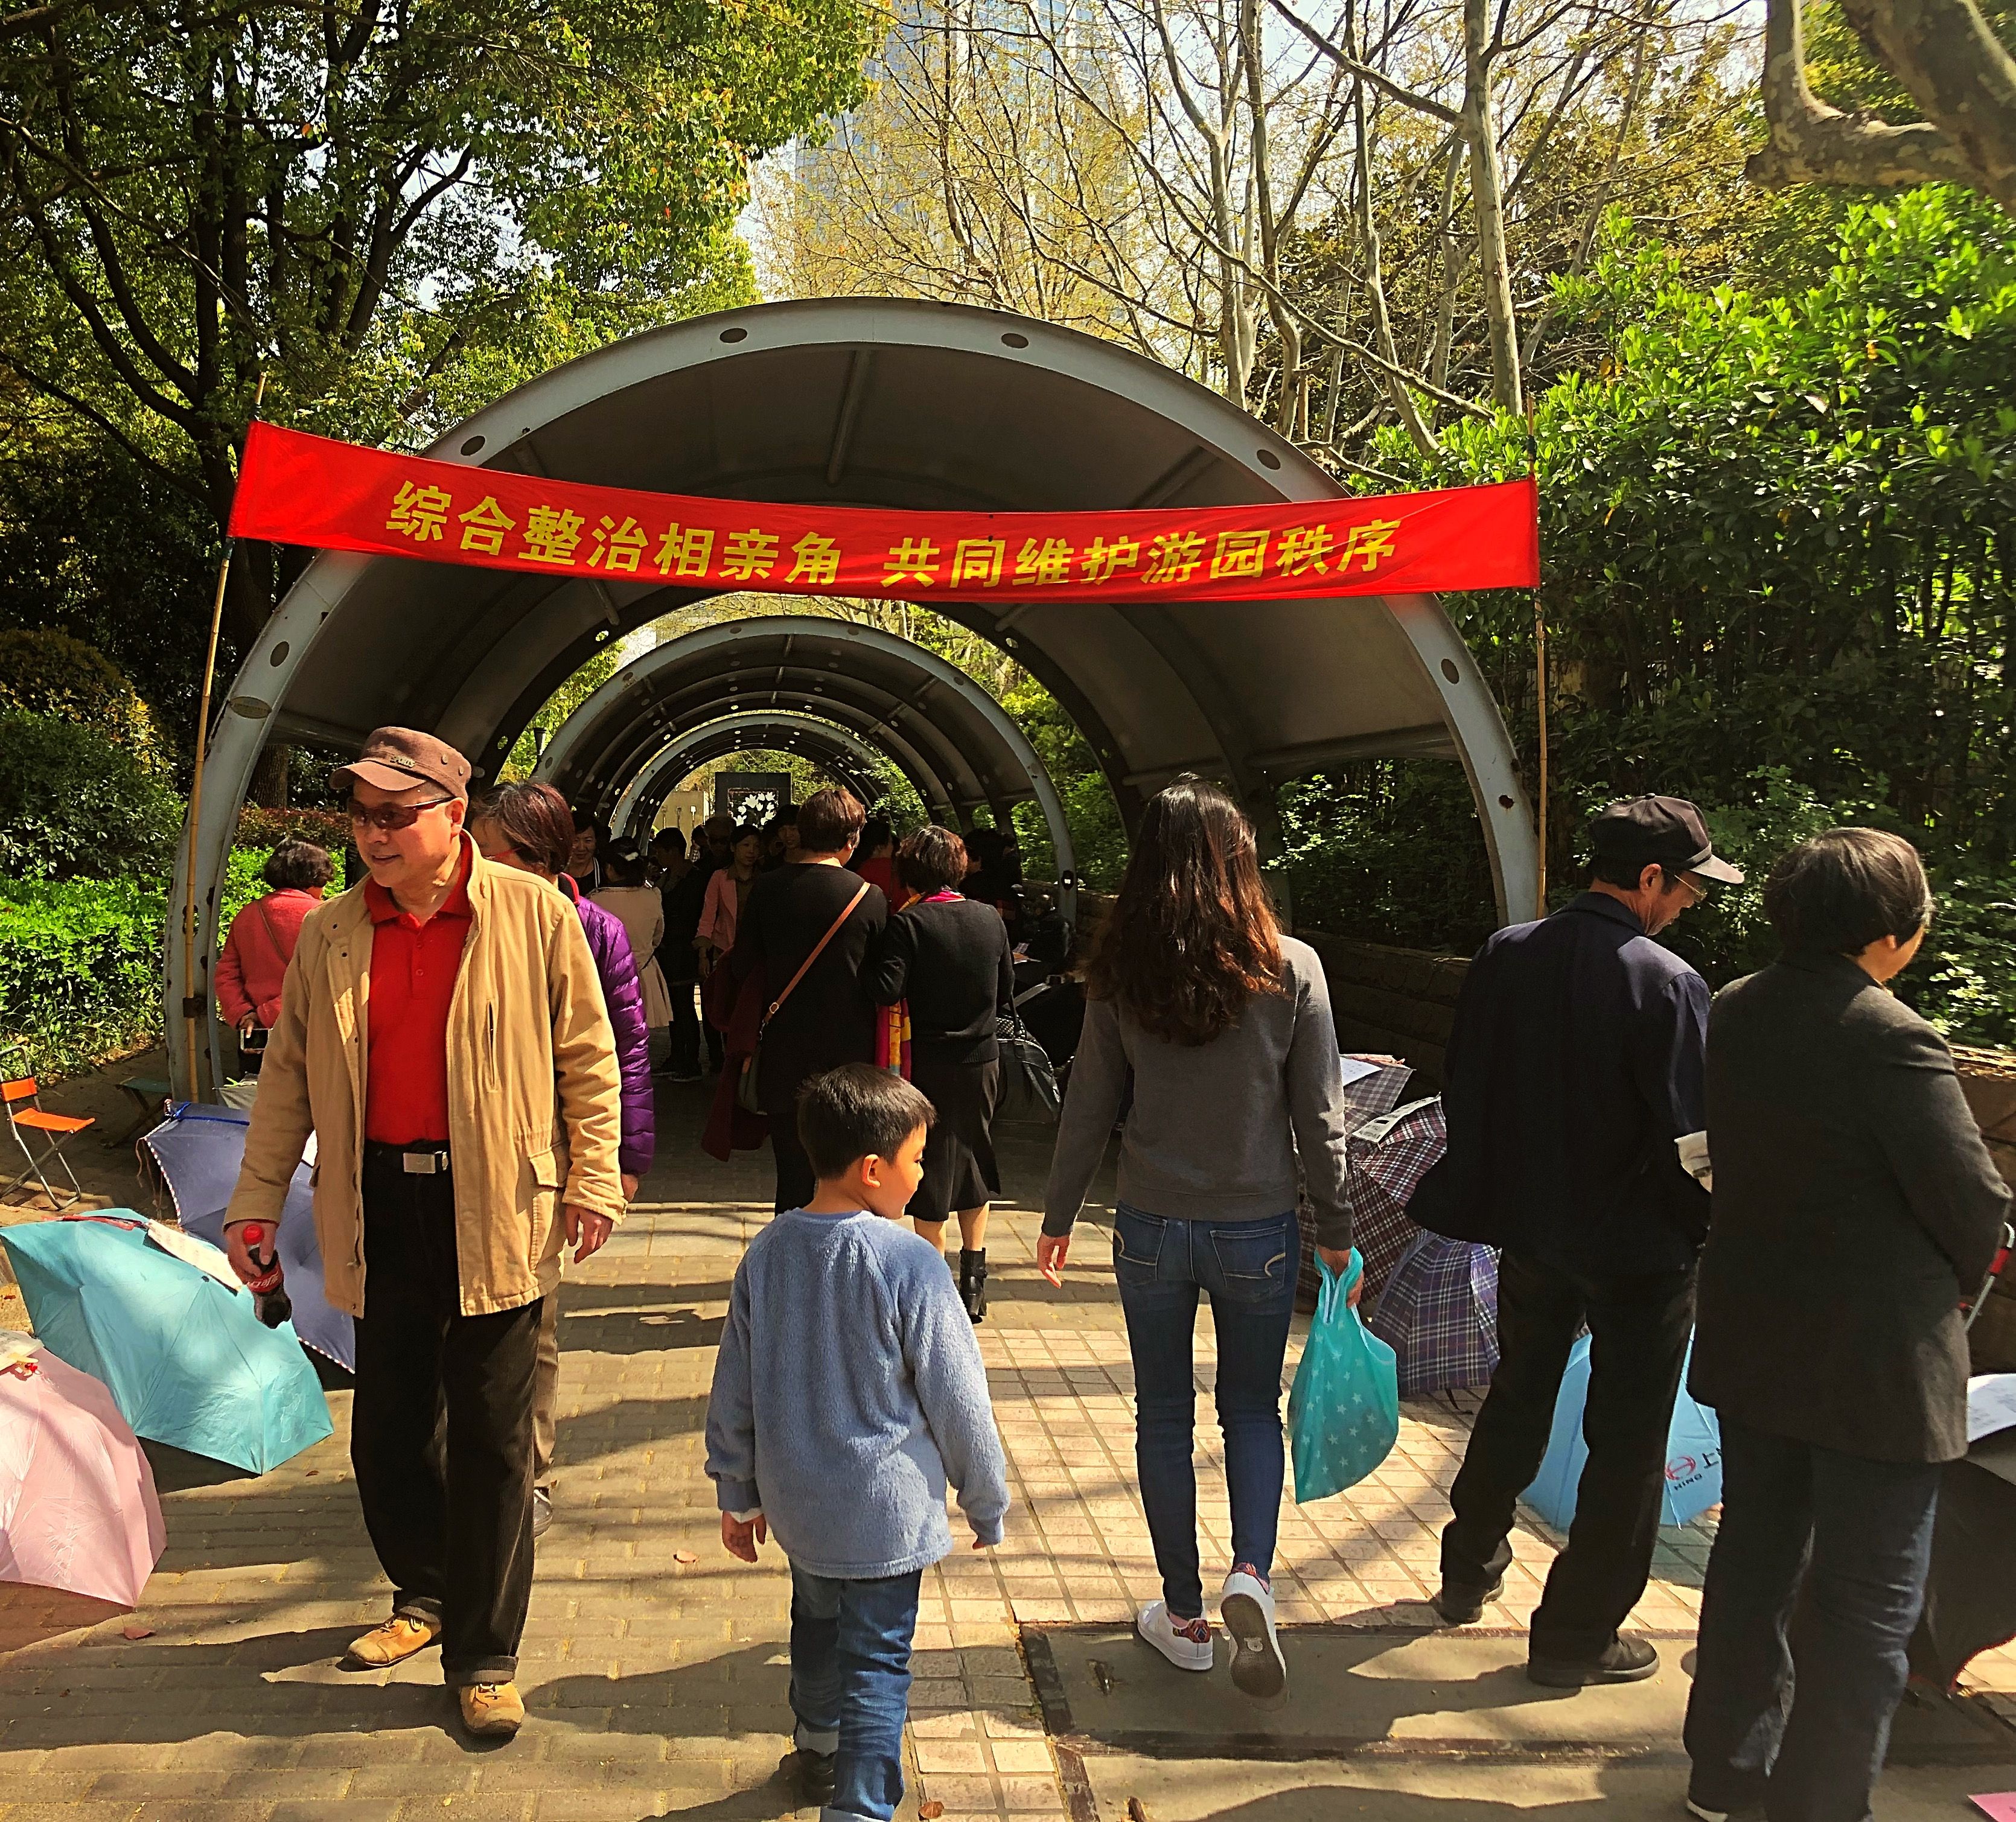 At the marriage market in Shanghai parents post resumes of their children in hopes of finding a spouse for them. The young and their elders read the resumes as they walk through the market. Image by Argentina Maria-Vanderhorst. China, 2018.